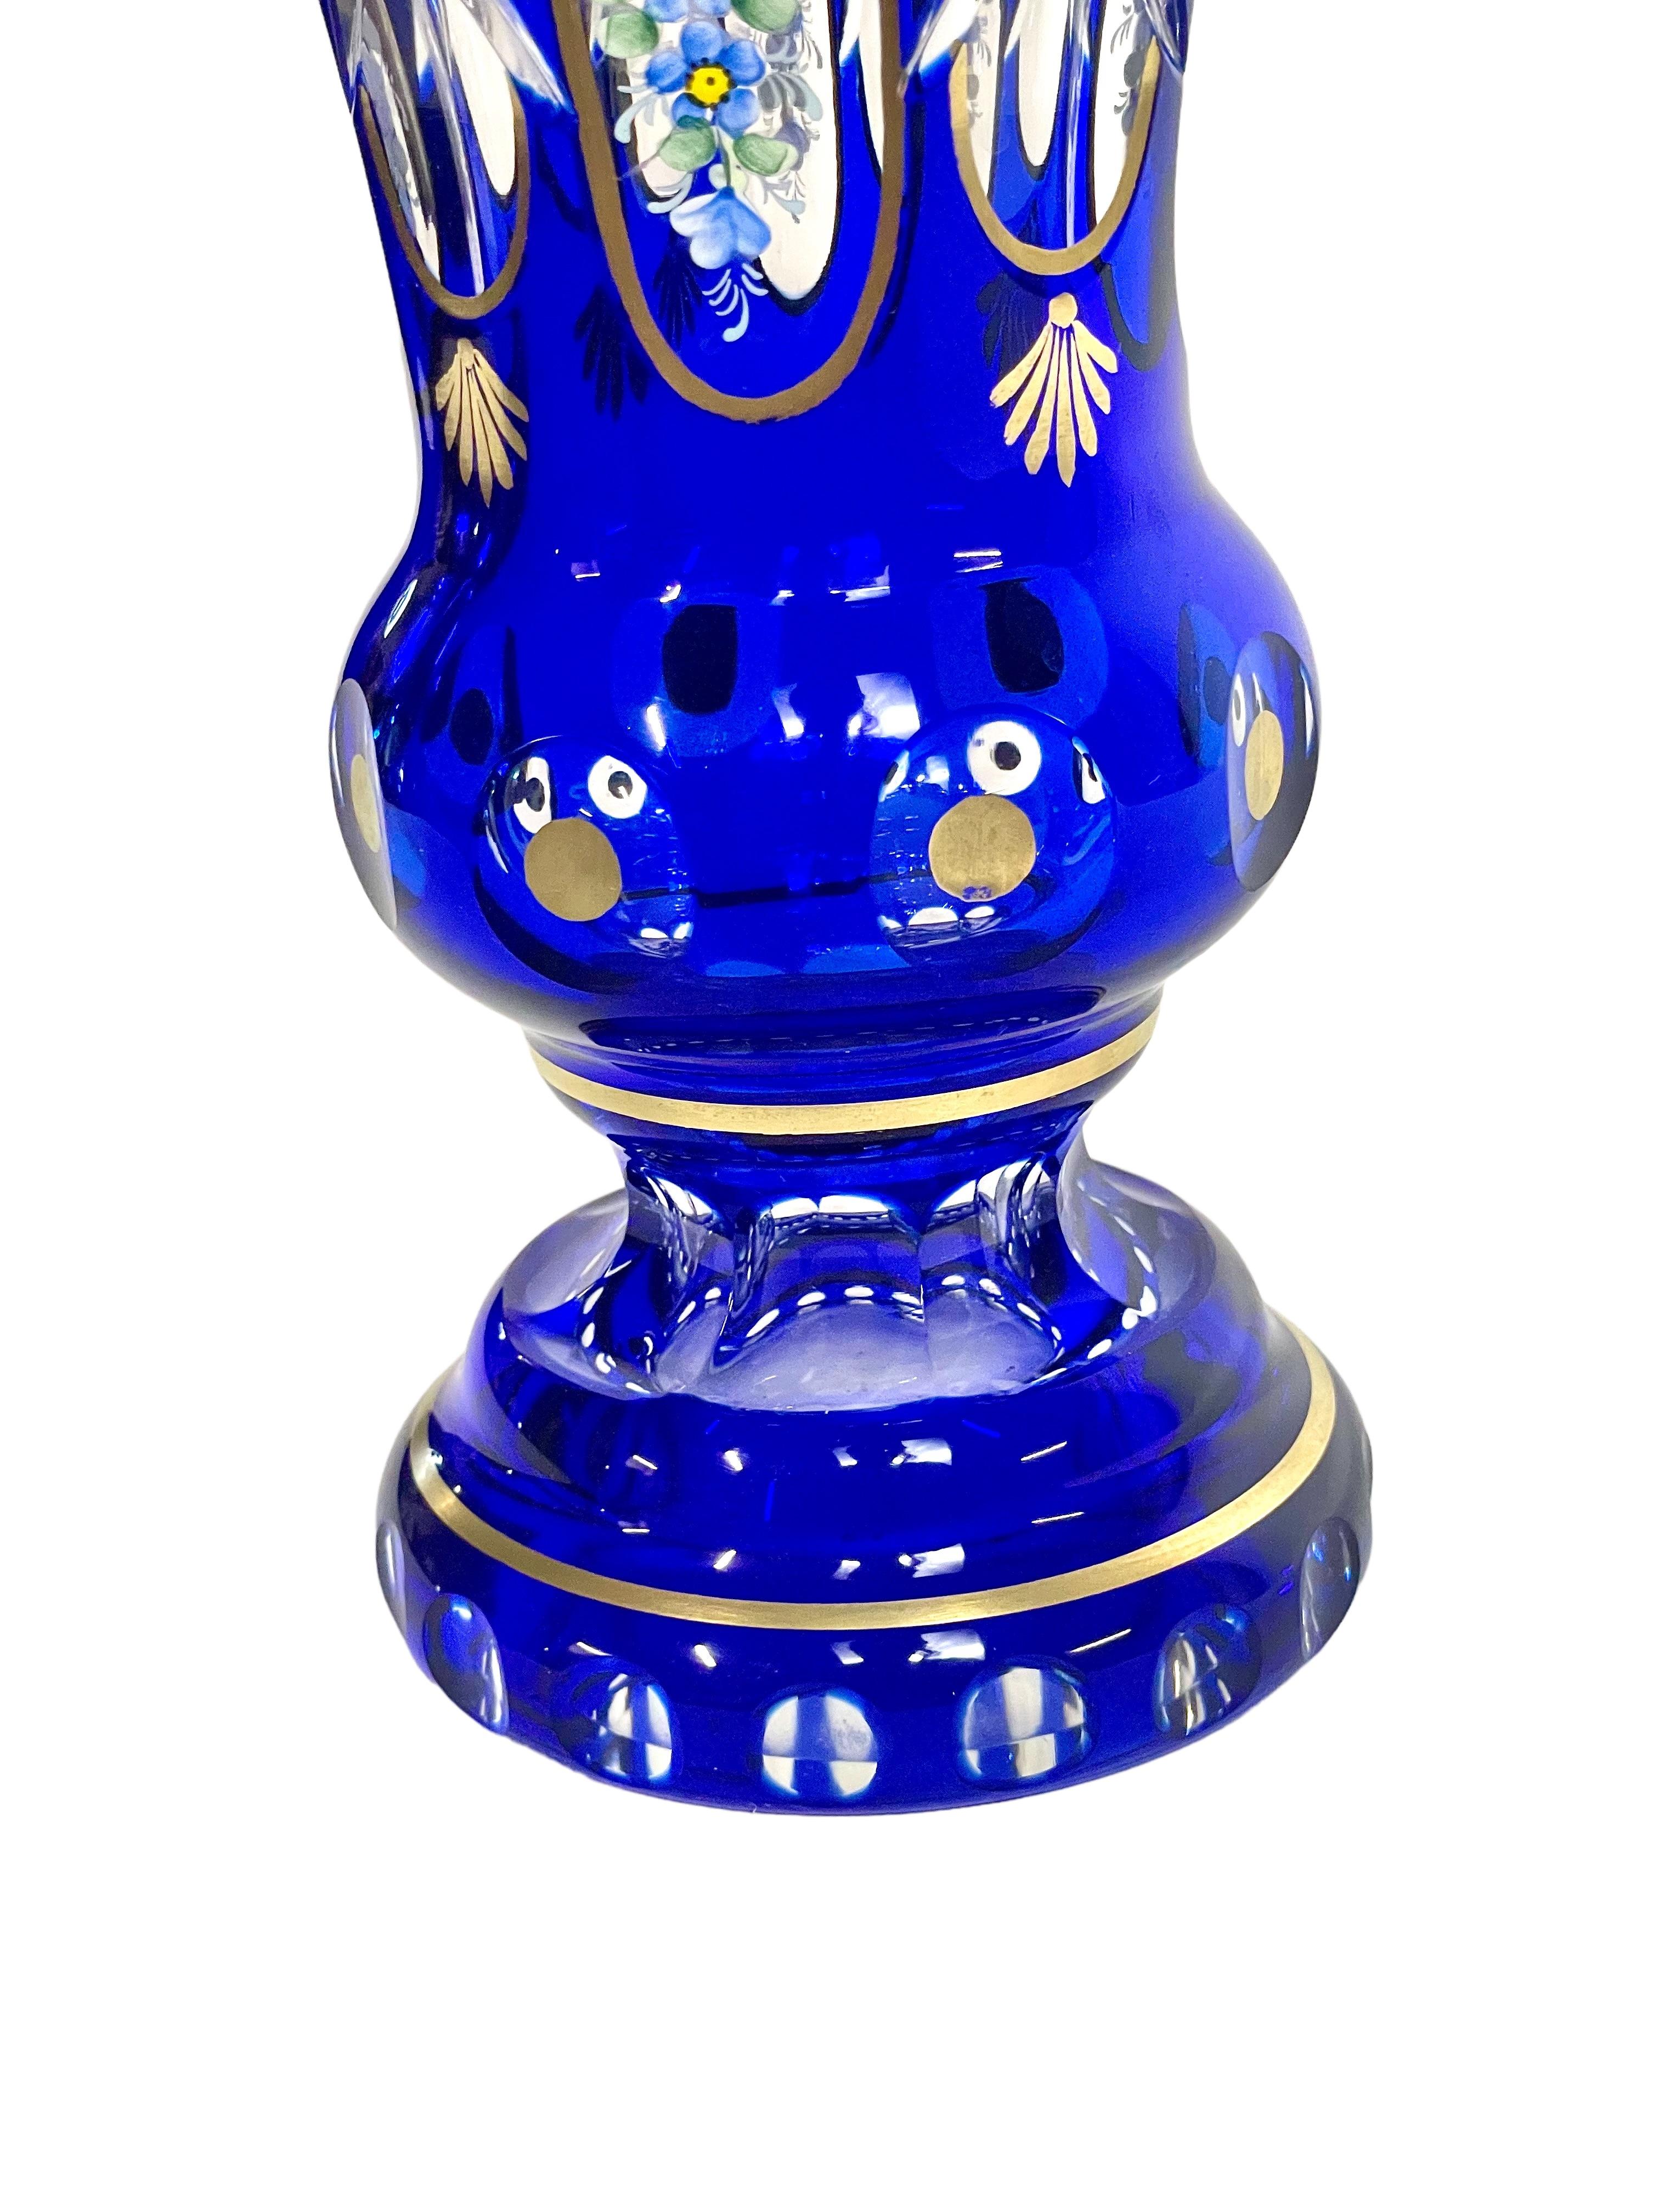 An attractive cobalt-blue crystal overlay footed urn vase, hand-blown and cut, and painted with enamel flower motifs and intricate gold trimming. This Bohemian-style vase would be a marvellous addition to a vintage bedroom décor, or on an ornate